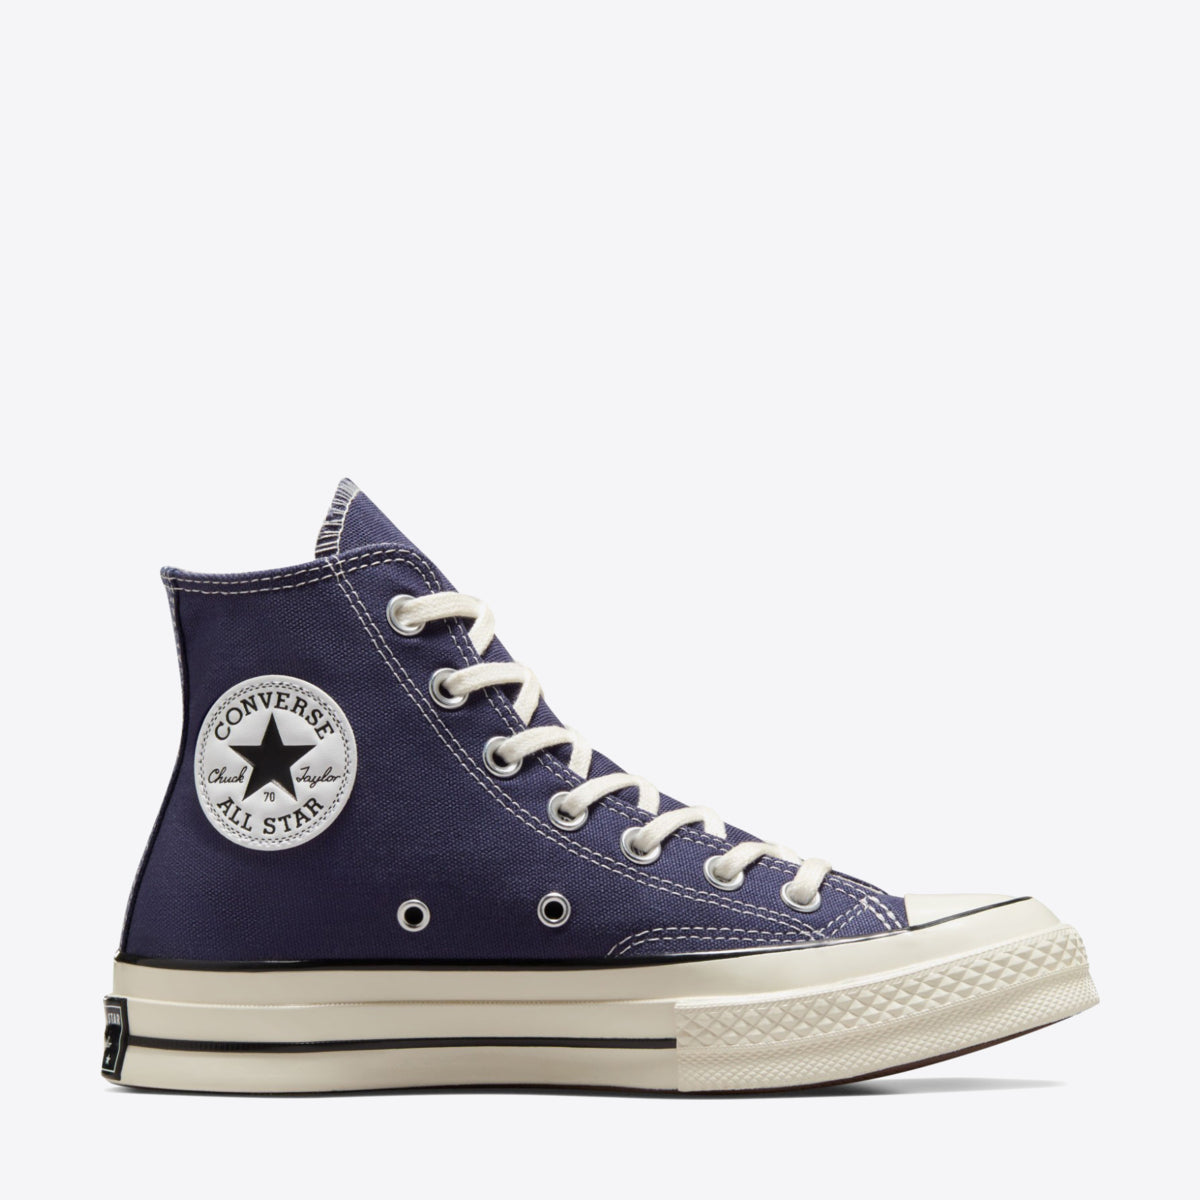 CONVERSE Chuck Taylor 70 Seasonal High Uncharted Waters/Egret - Image 1